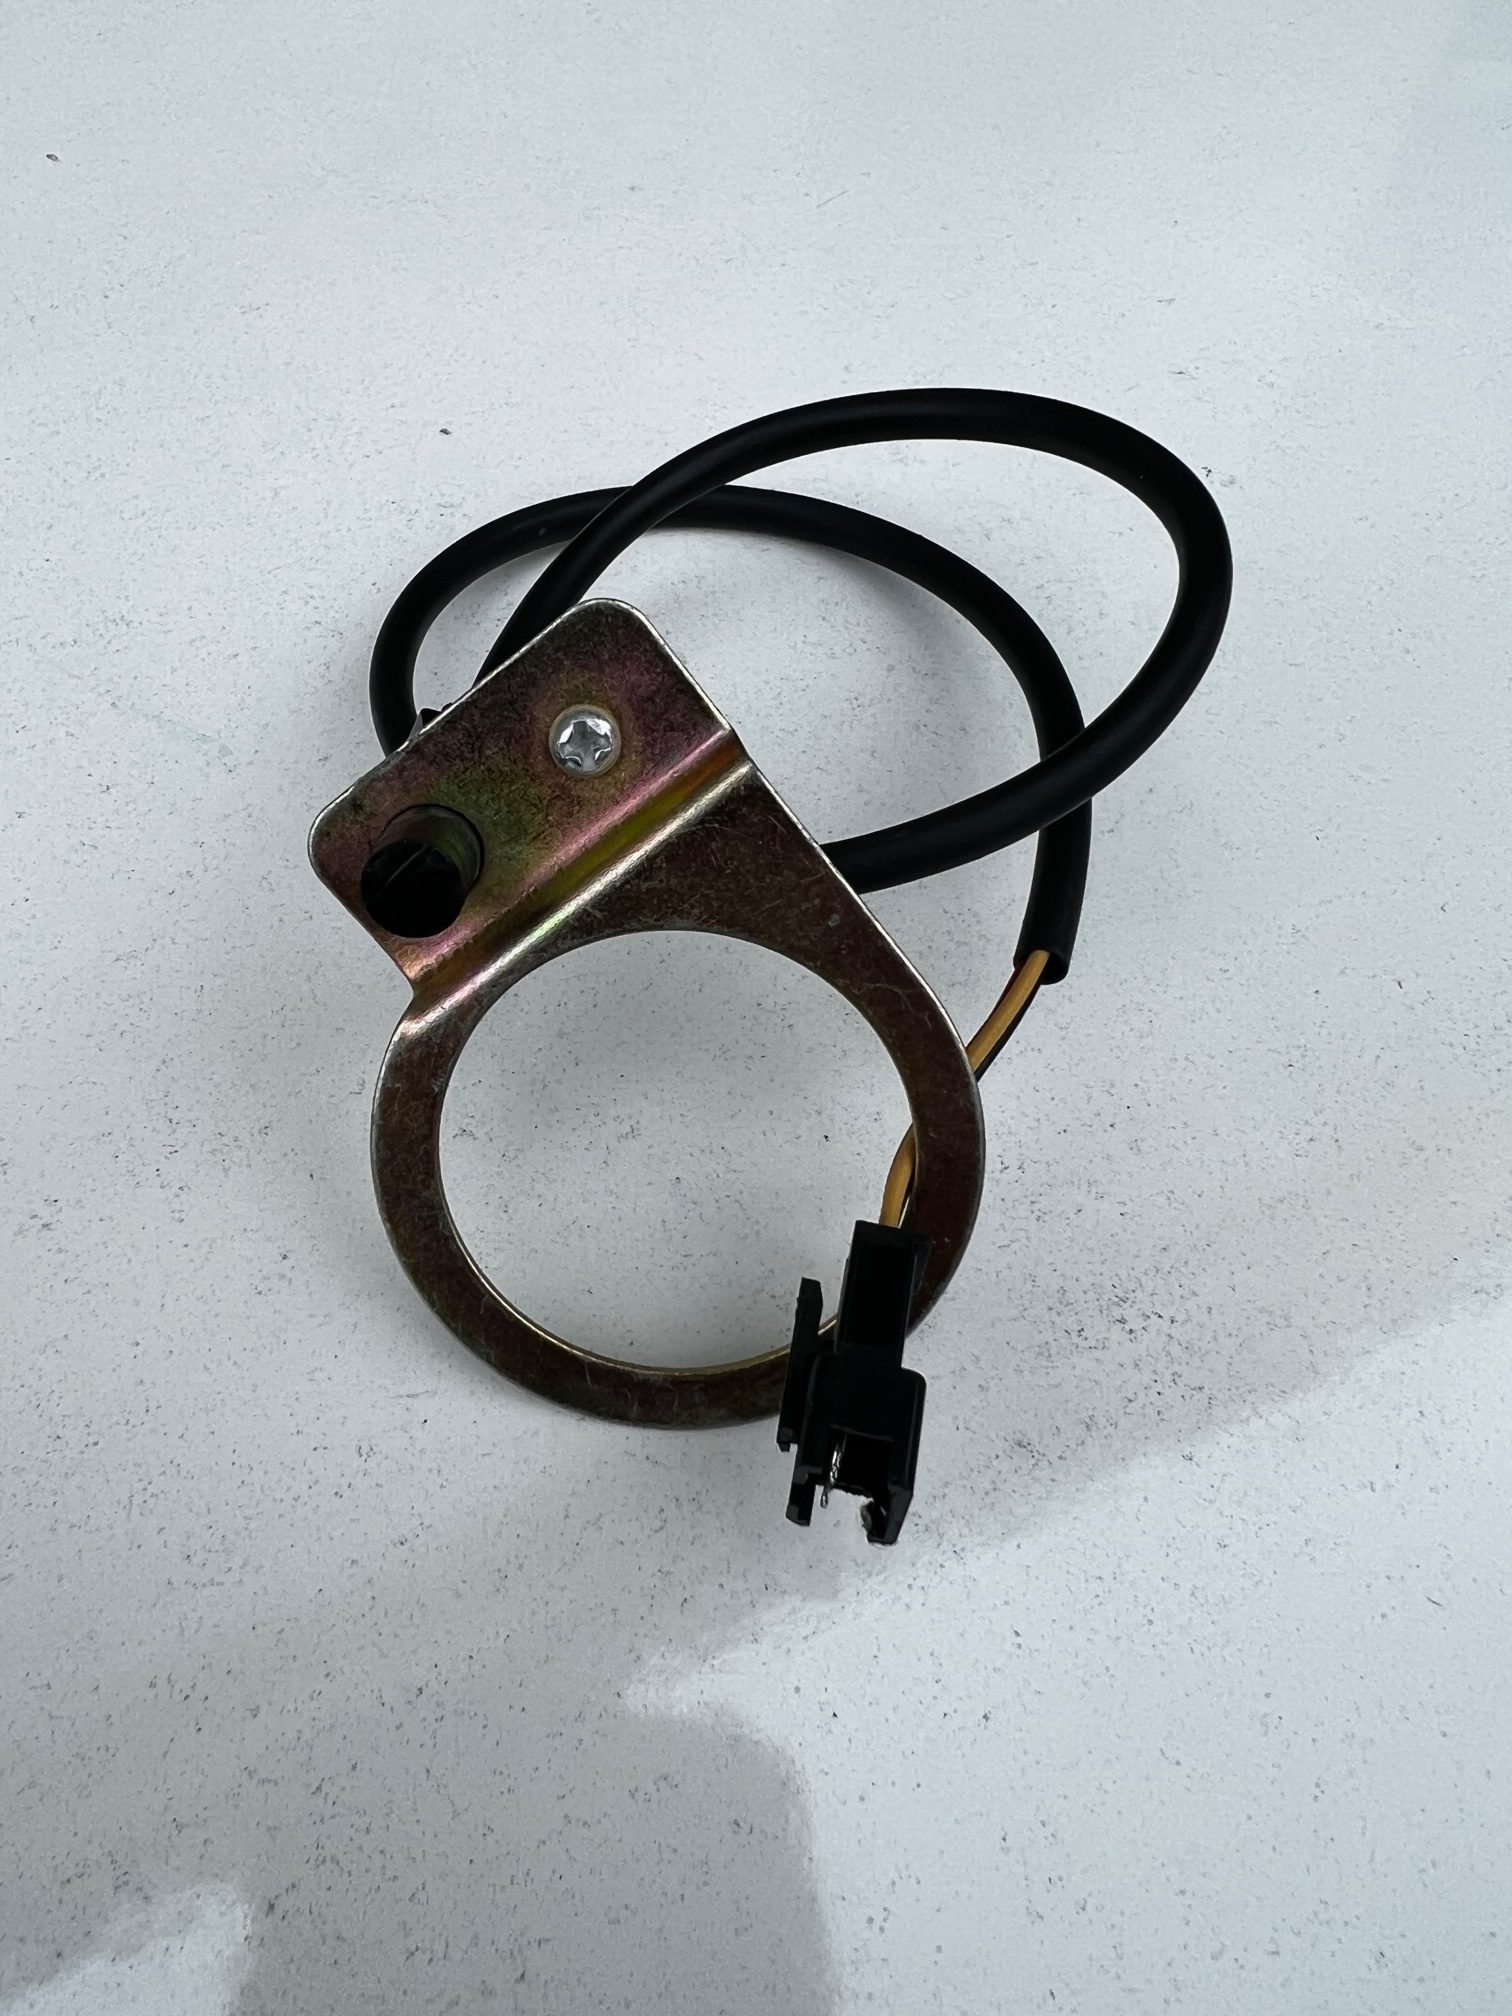 Ring type pick up sensor for Freego electric bike